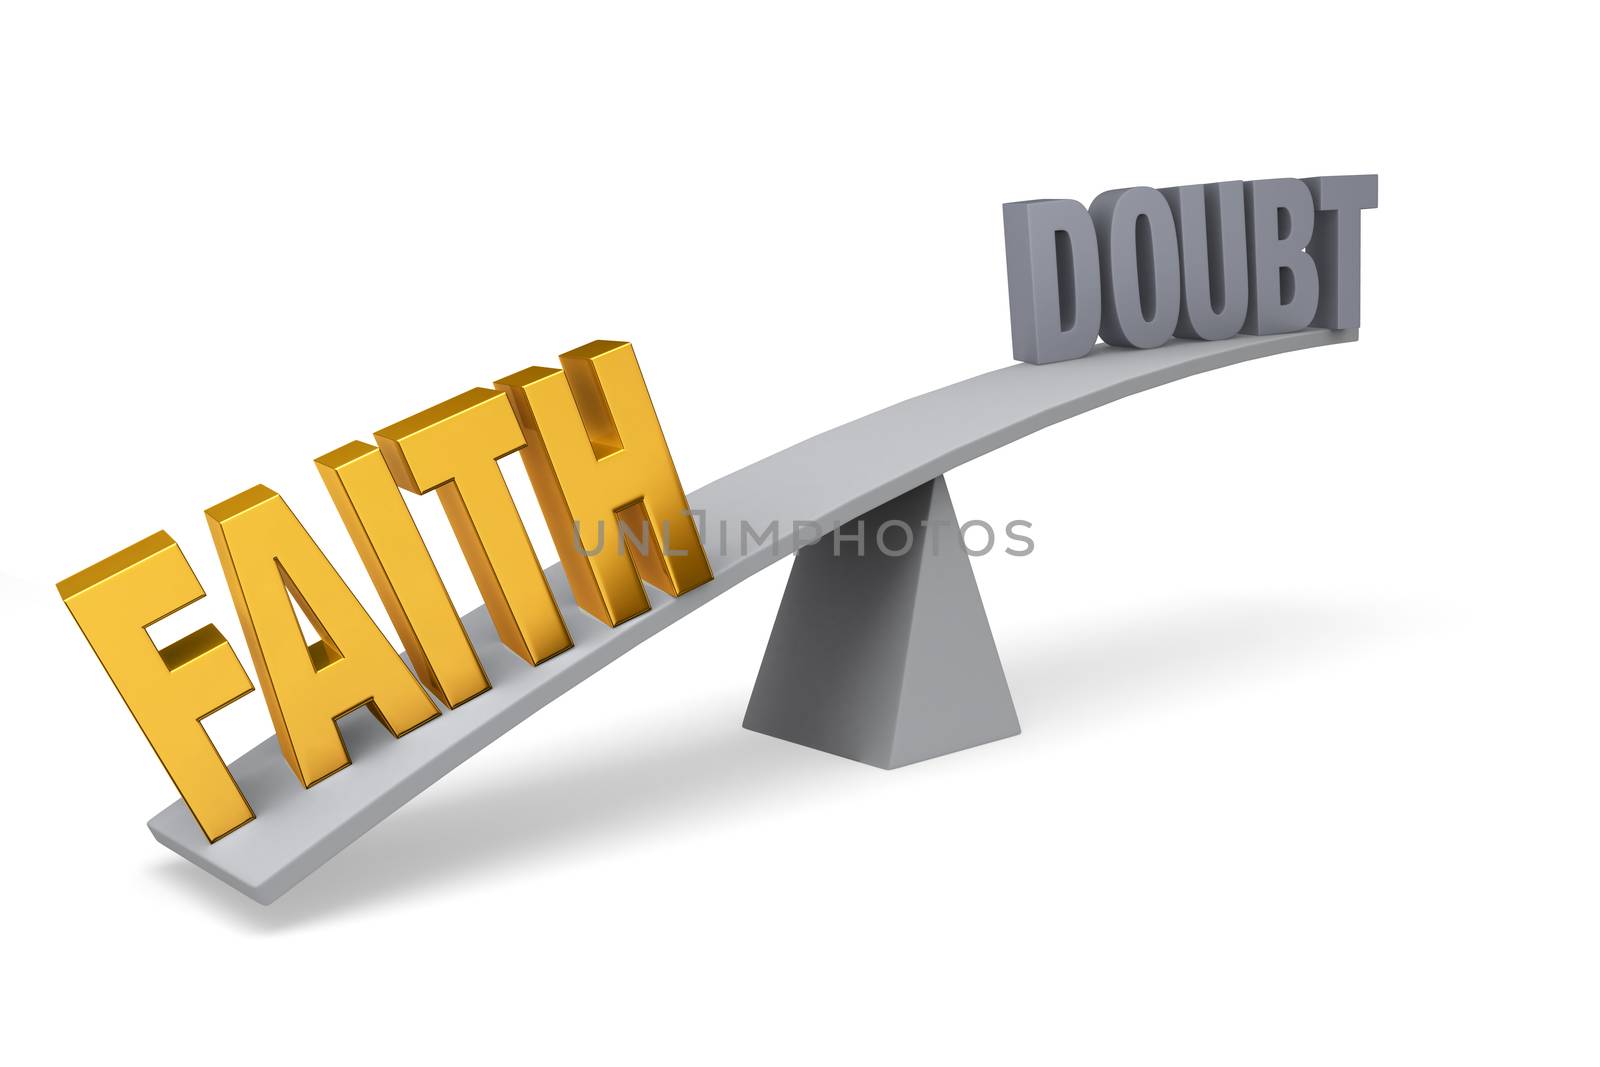 Bright, gold "FAITH" weighs one end of a gray balance beam down while a gray "DOUBT" sits high in the air on the other end. Isolated on white.